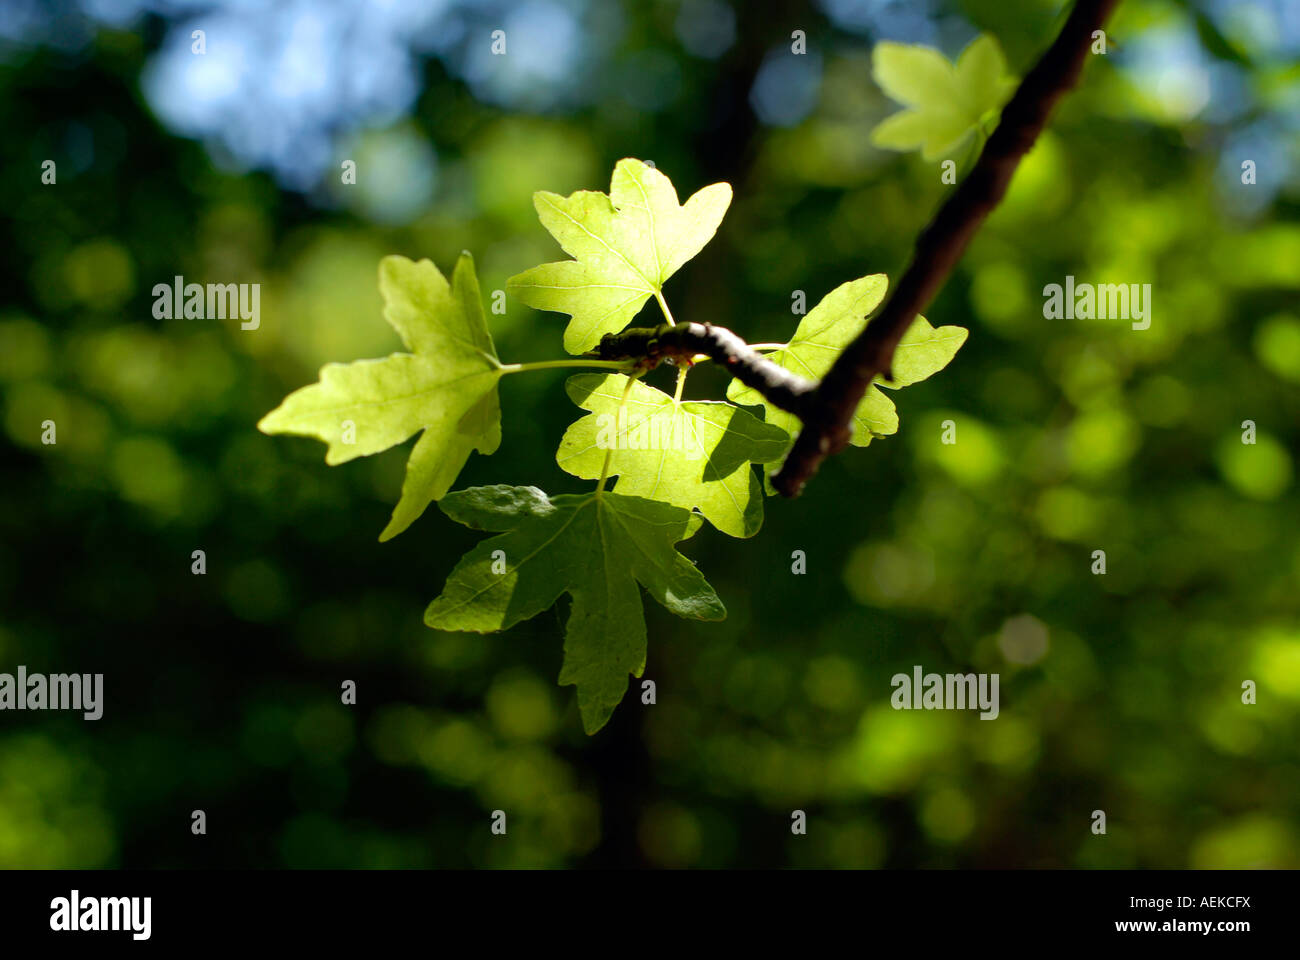 A tree branch with a leaves Stock Photo